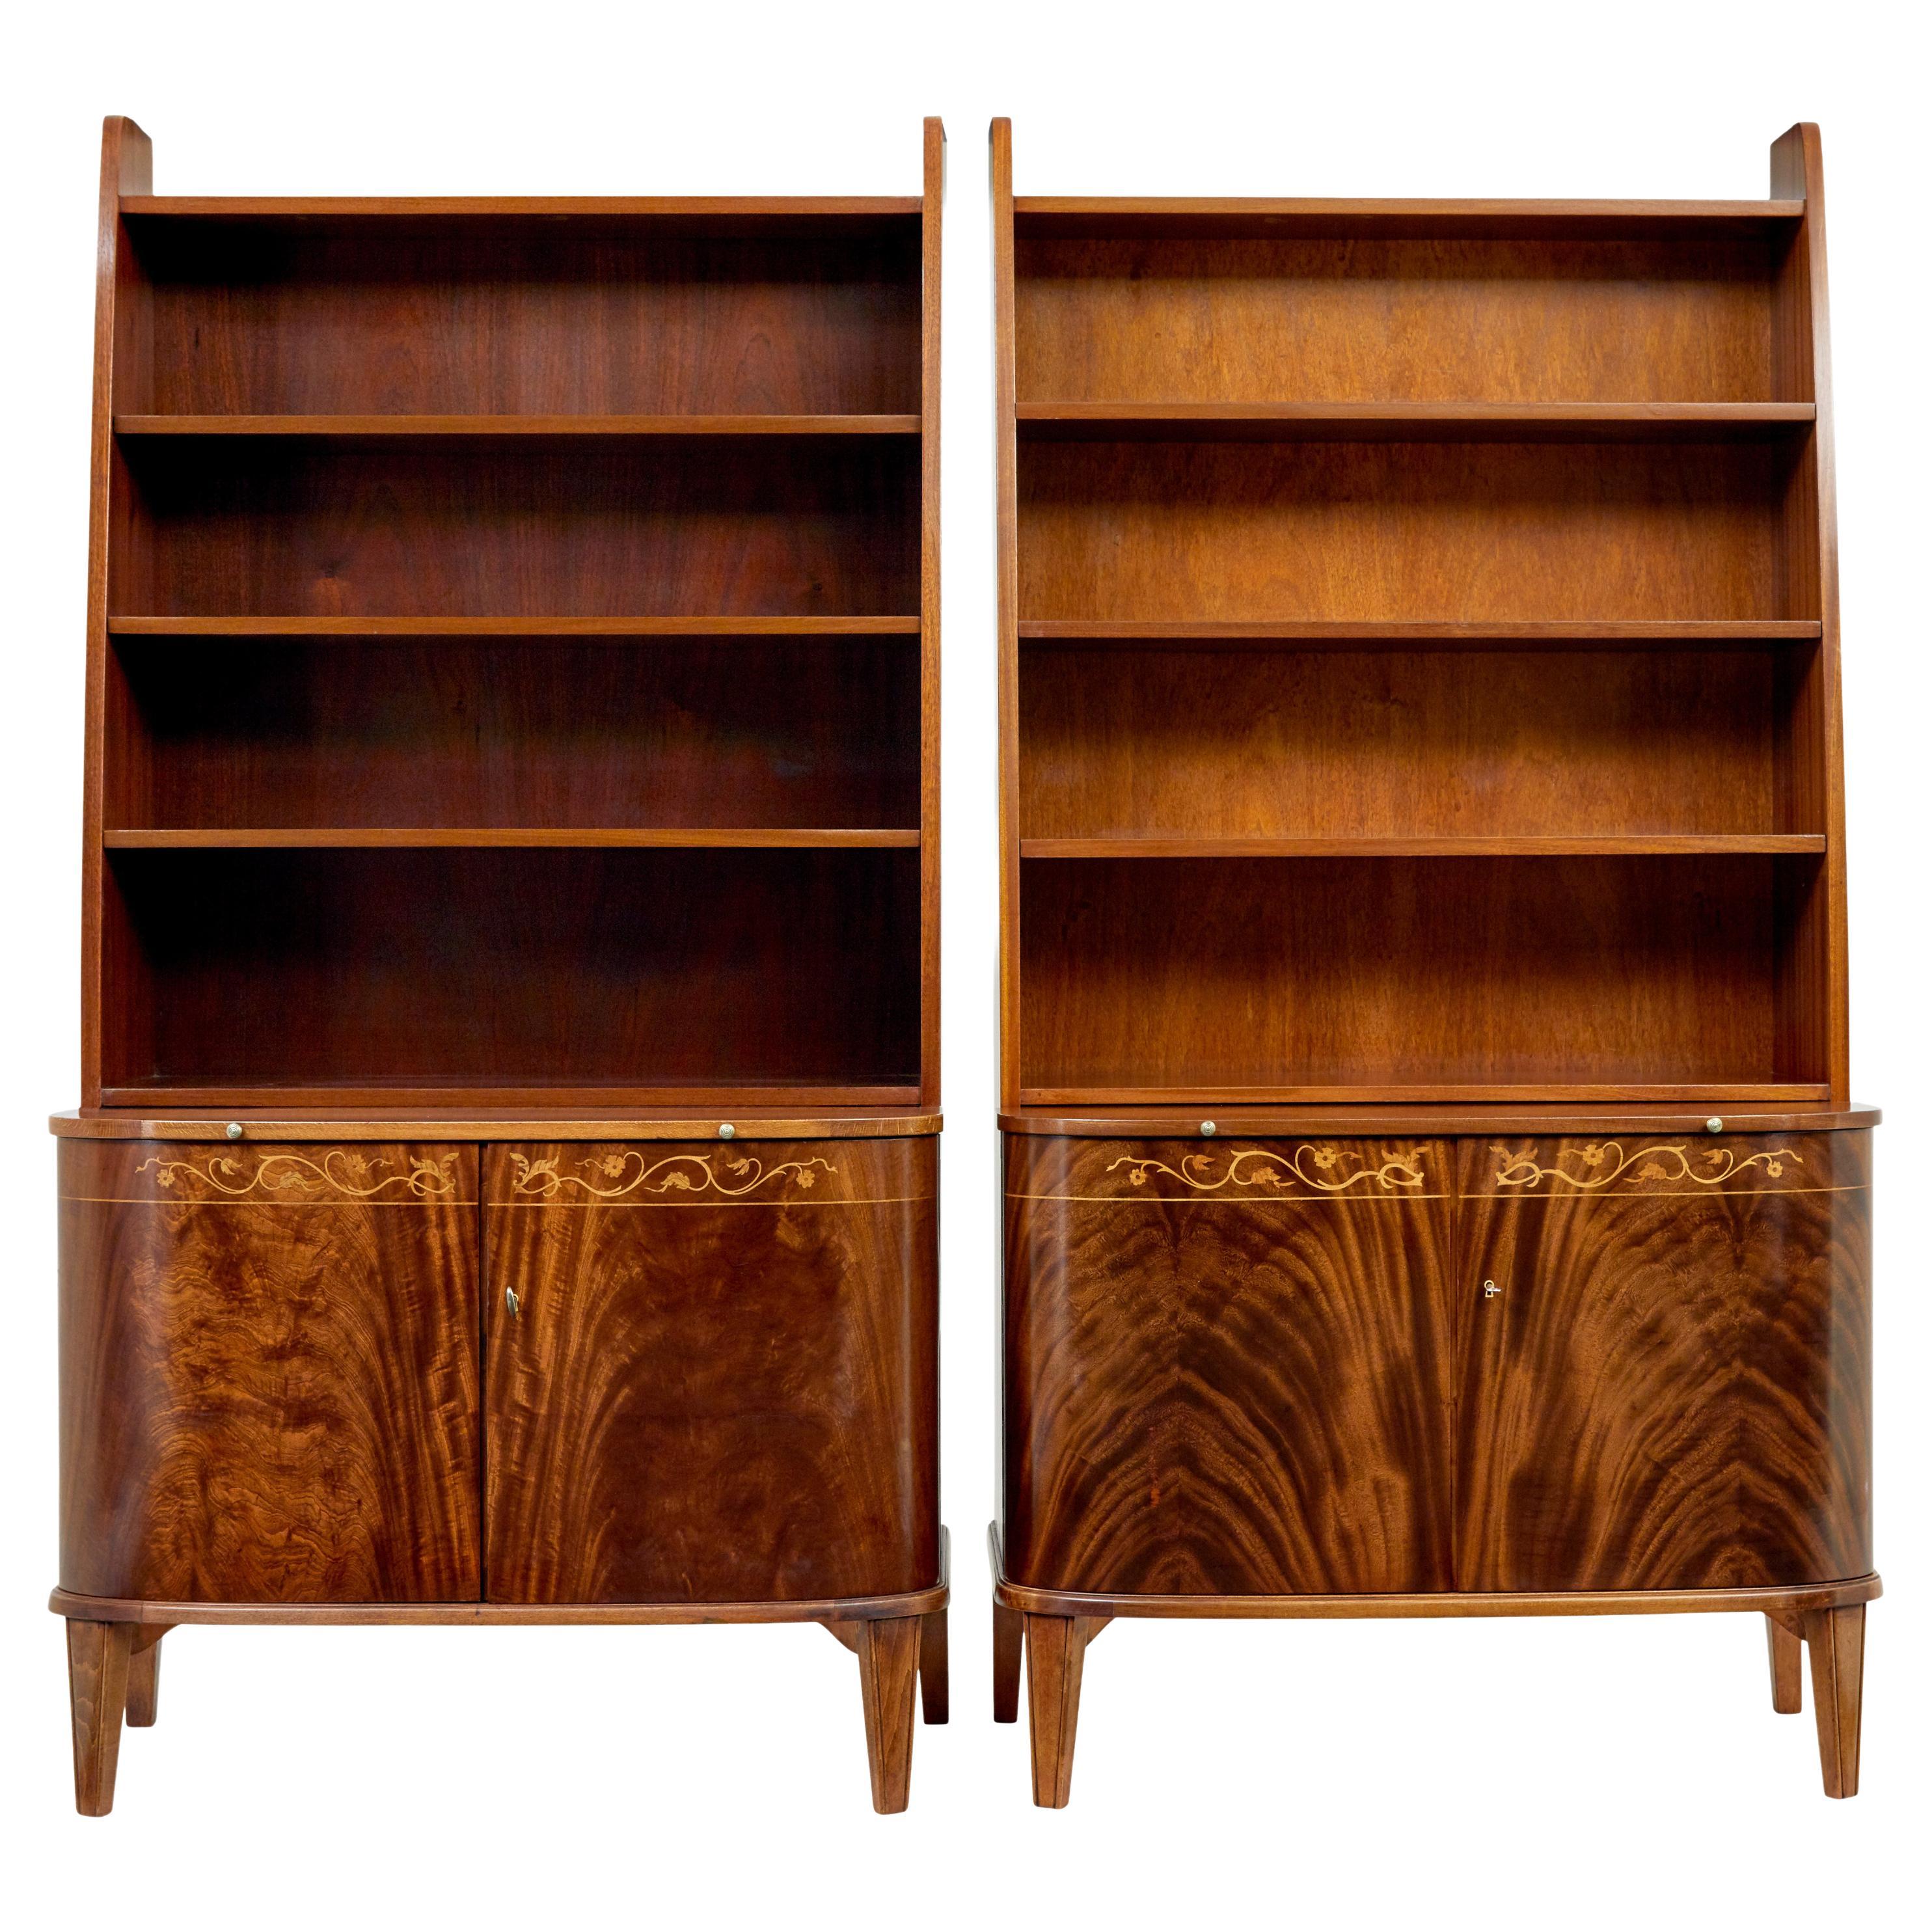 Pair of mid 20th century flame mahogany Swedish bookcases by Bodafors